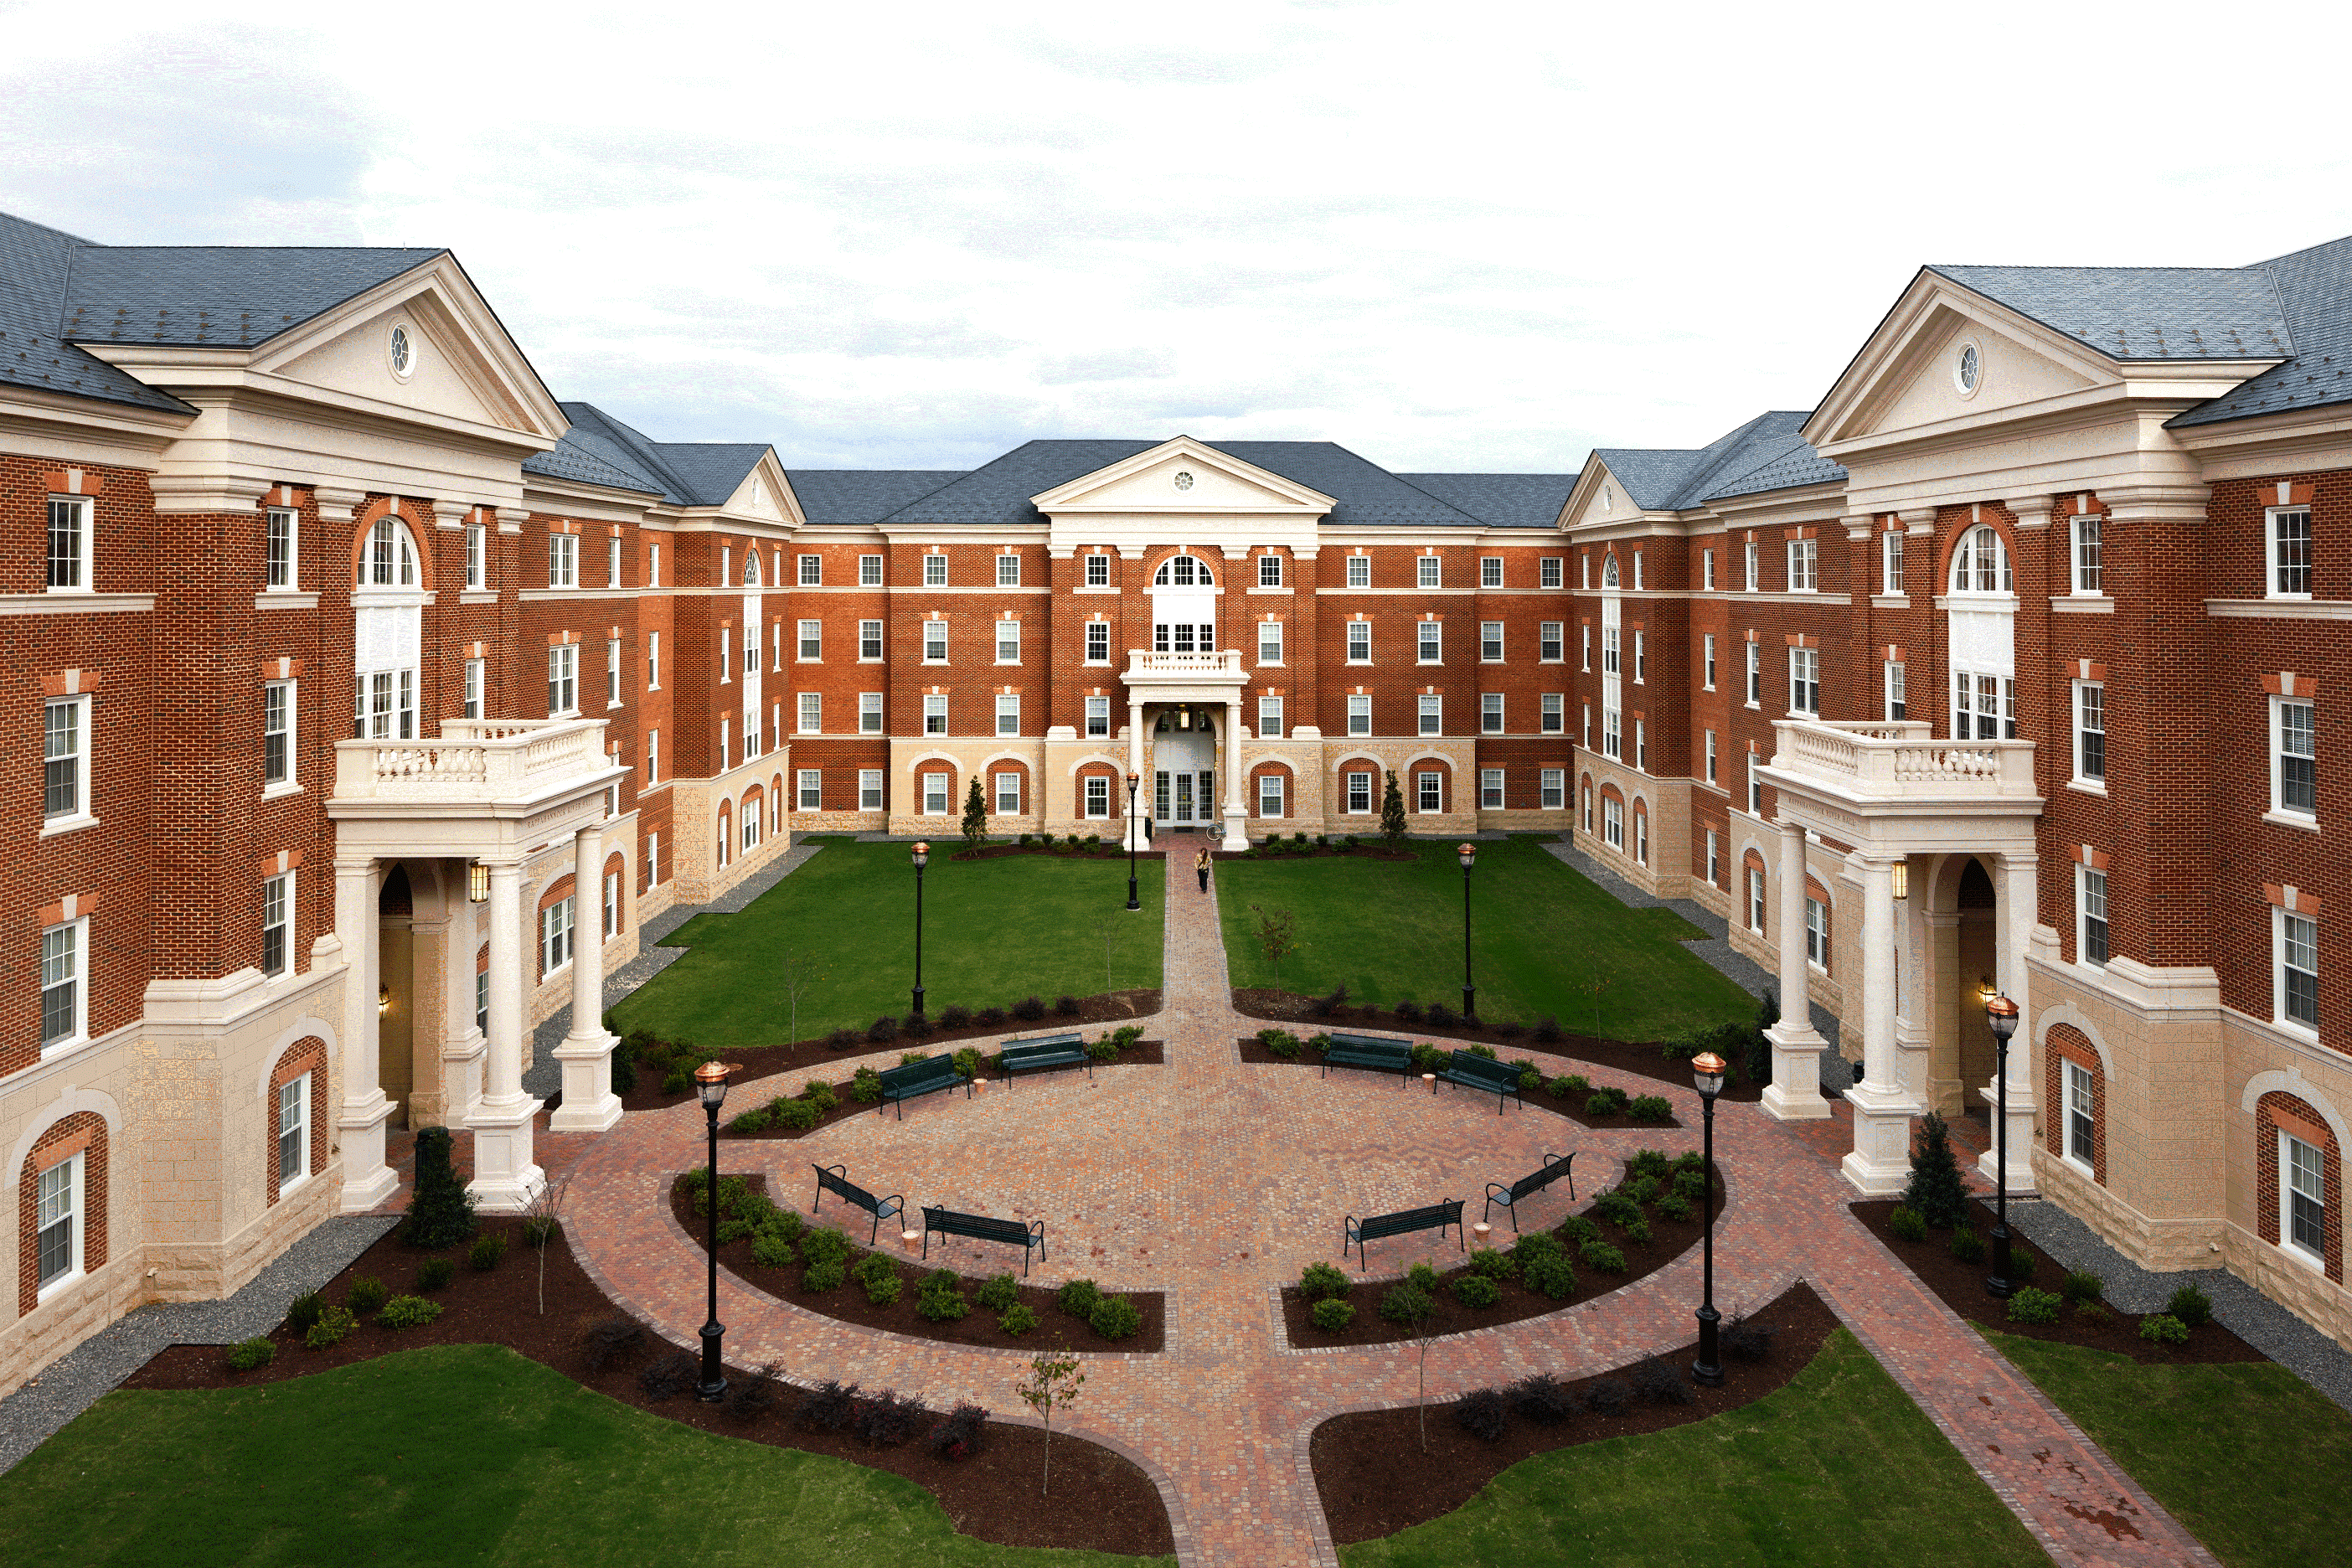 29 Pictures Of CNU Columns That Will Make You Feel Better About Rising Tuition